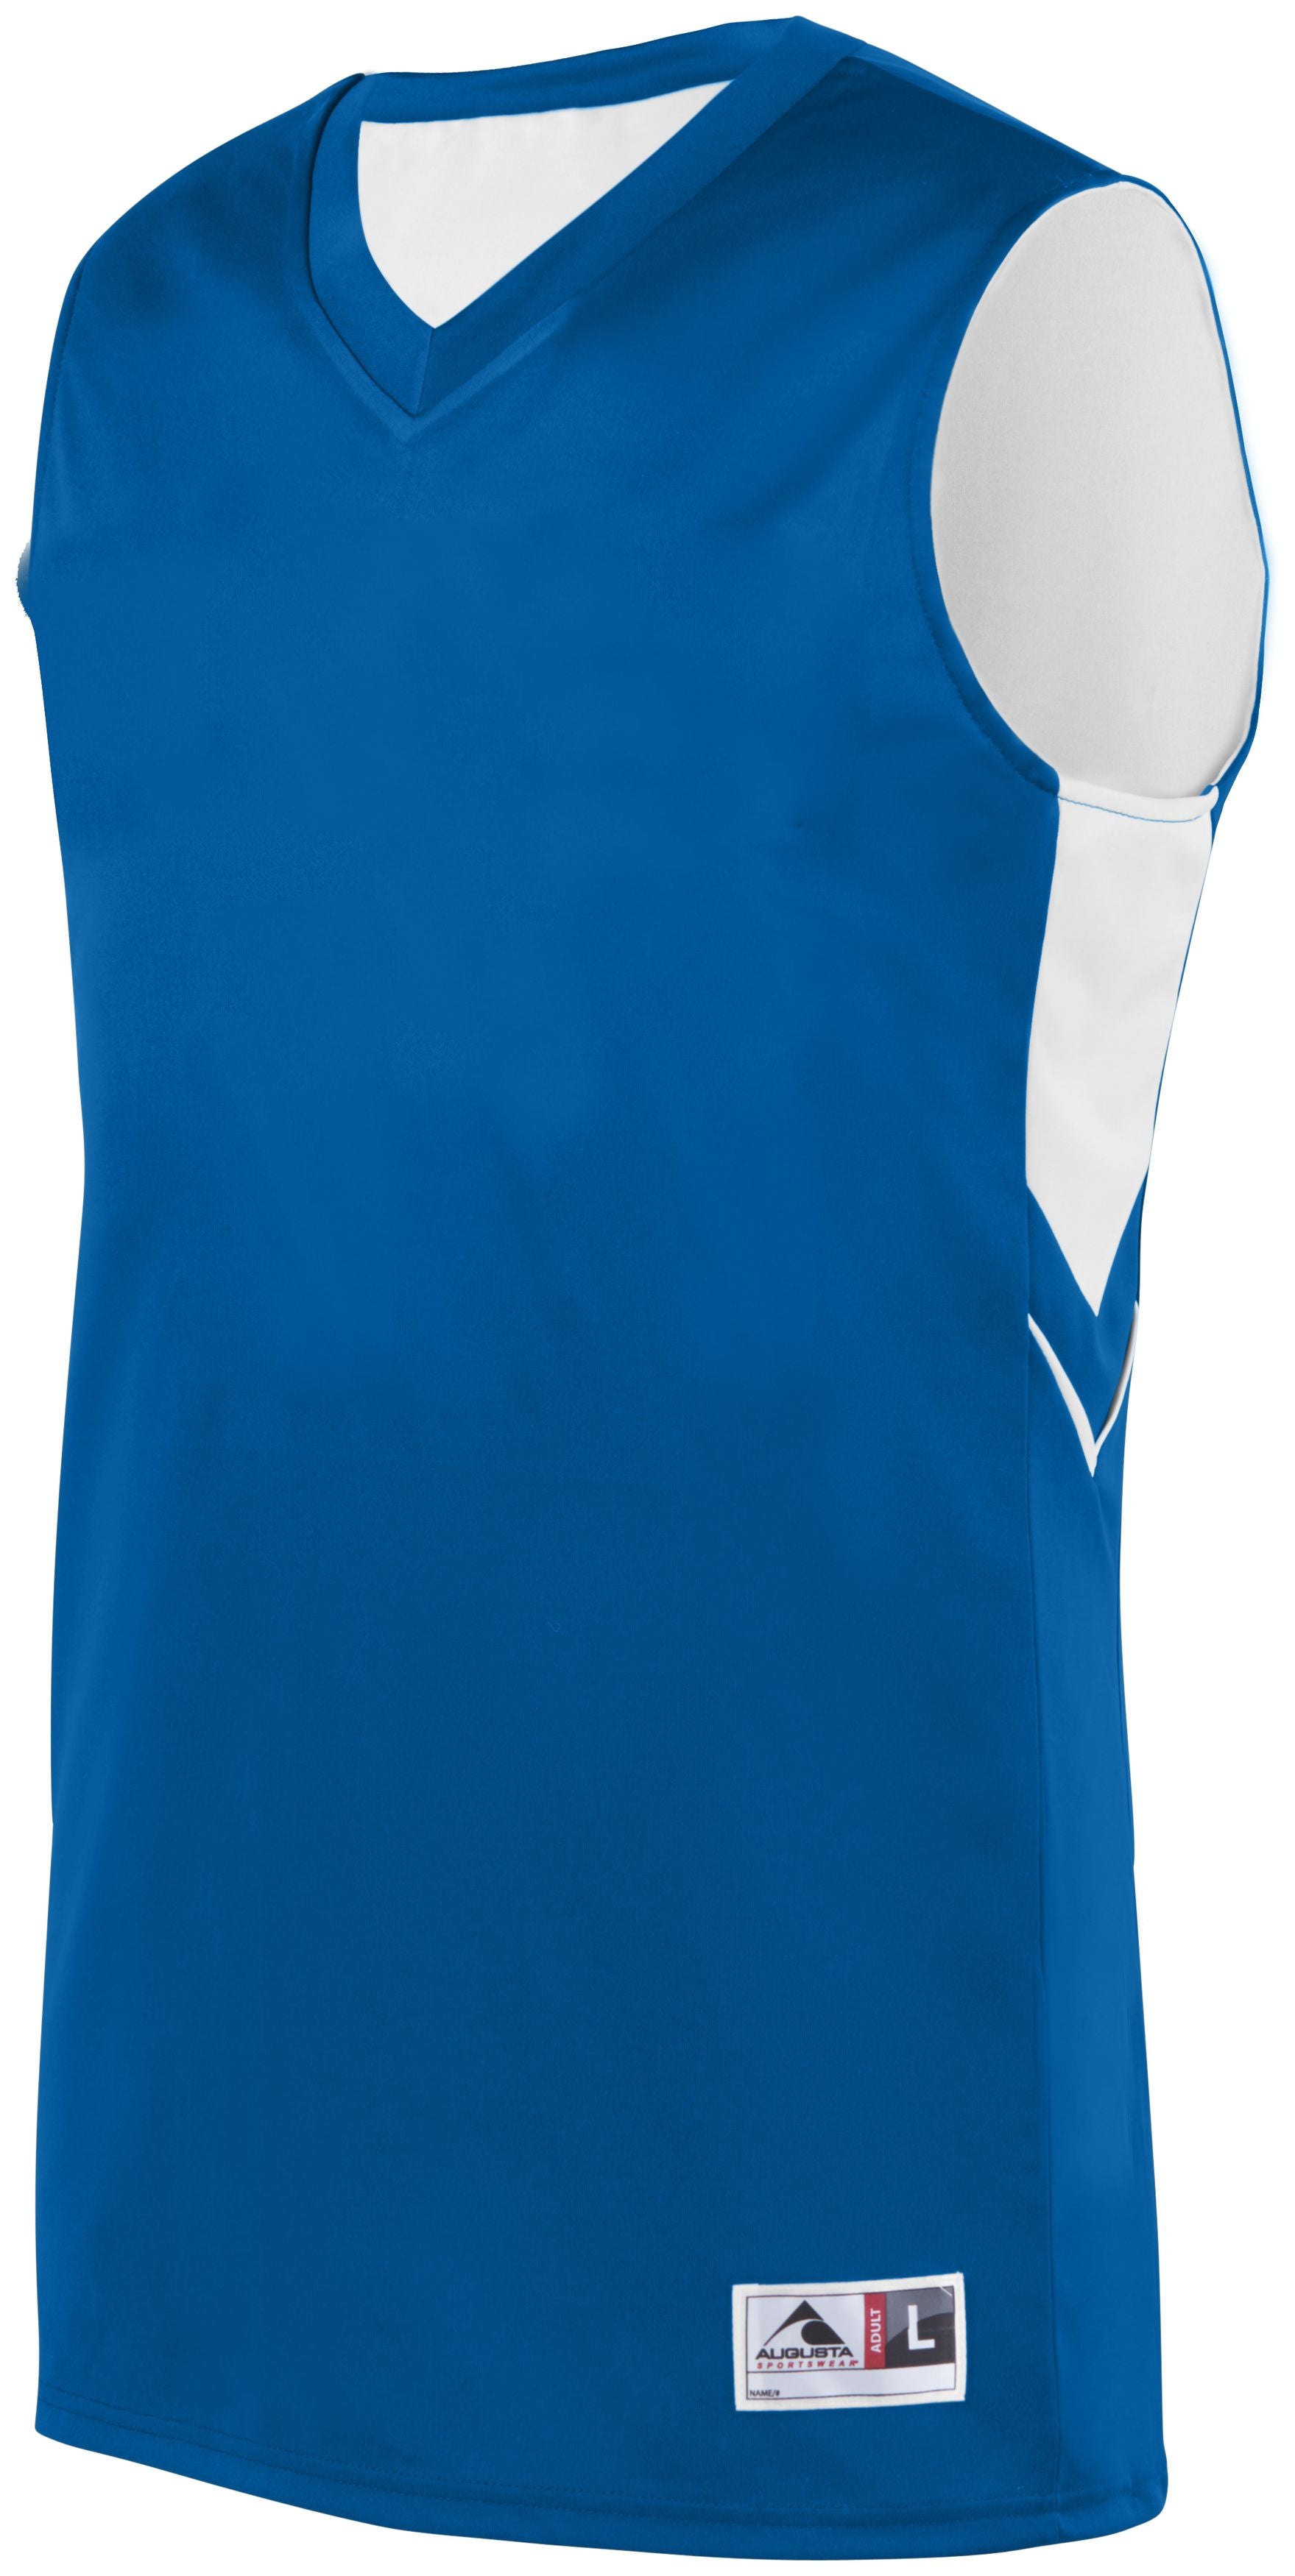 Augusta Sportswear Youth Alley-Oop Reversible Jersey in Royal/White  -Part of the Youth, Youth-Jersey, Augusta-Products, Basketball, Shirts, All-Sports, All-Sports-1 product lines at KanaleyCreations.com